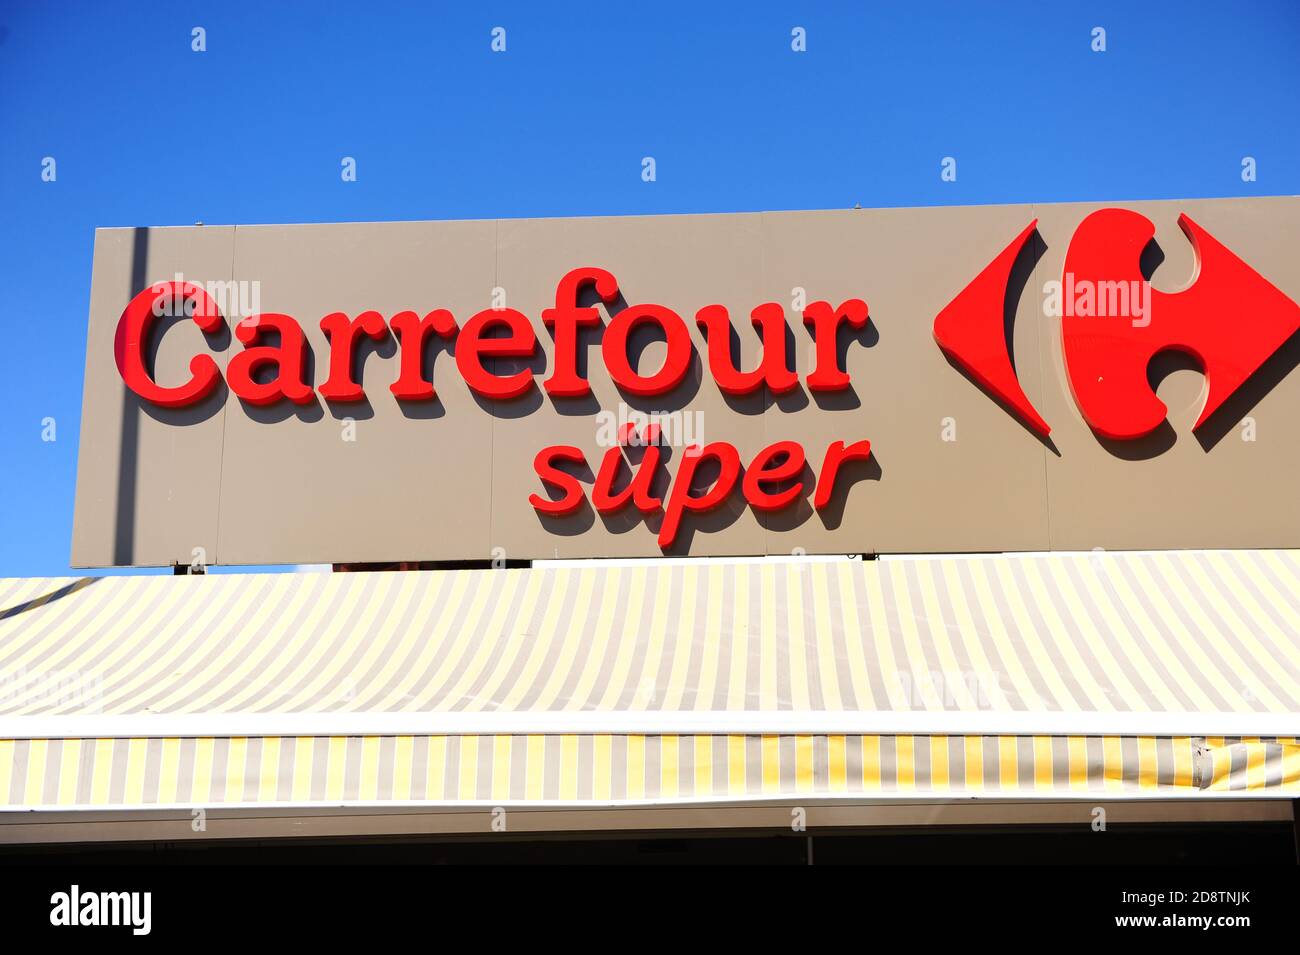 FETHIE, TURKEY - OCTOBER 11: The famous chain of carrefour grocery stores  in Fethie on October 11, 2020. Stock Photo